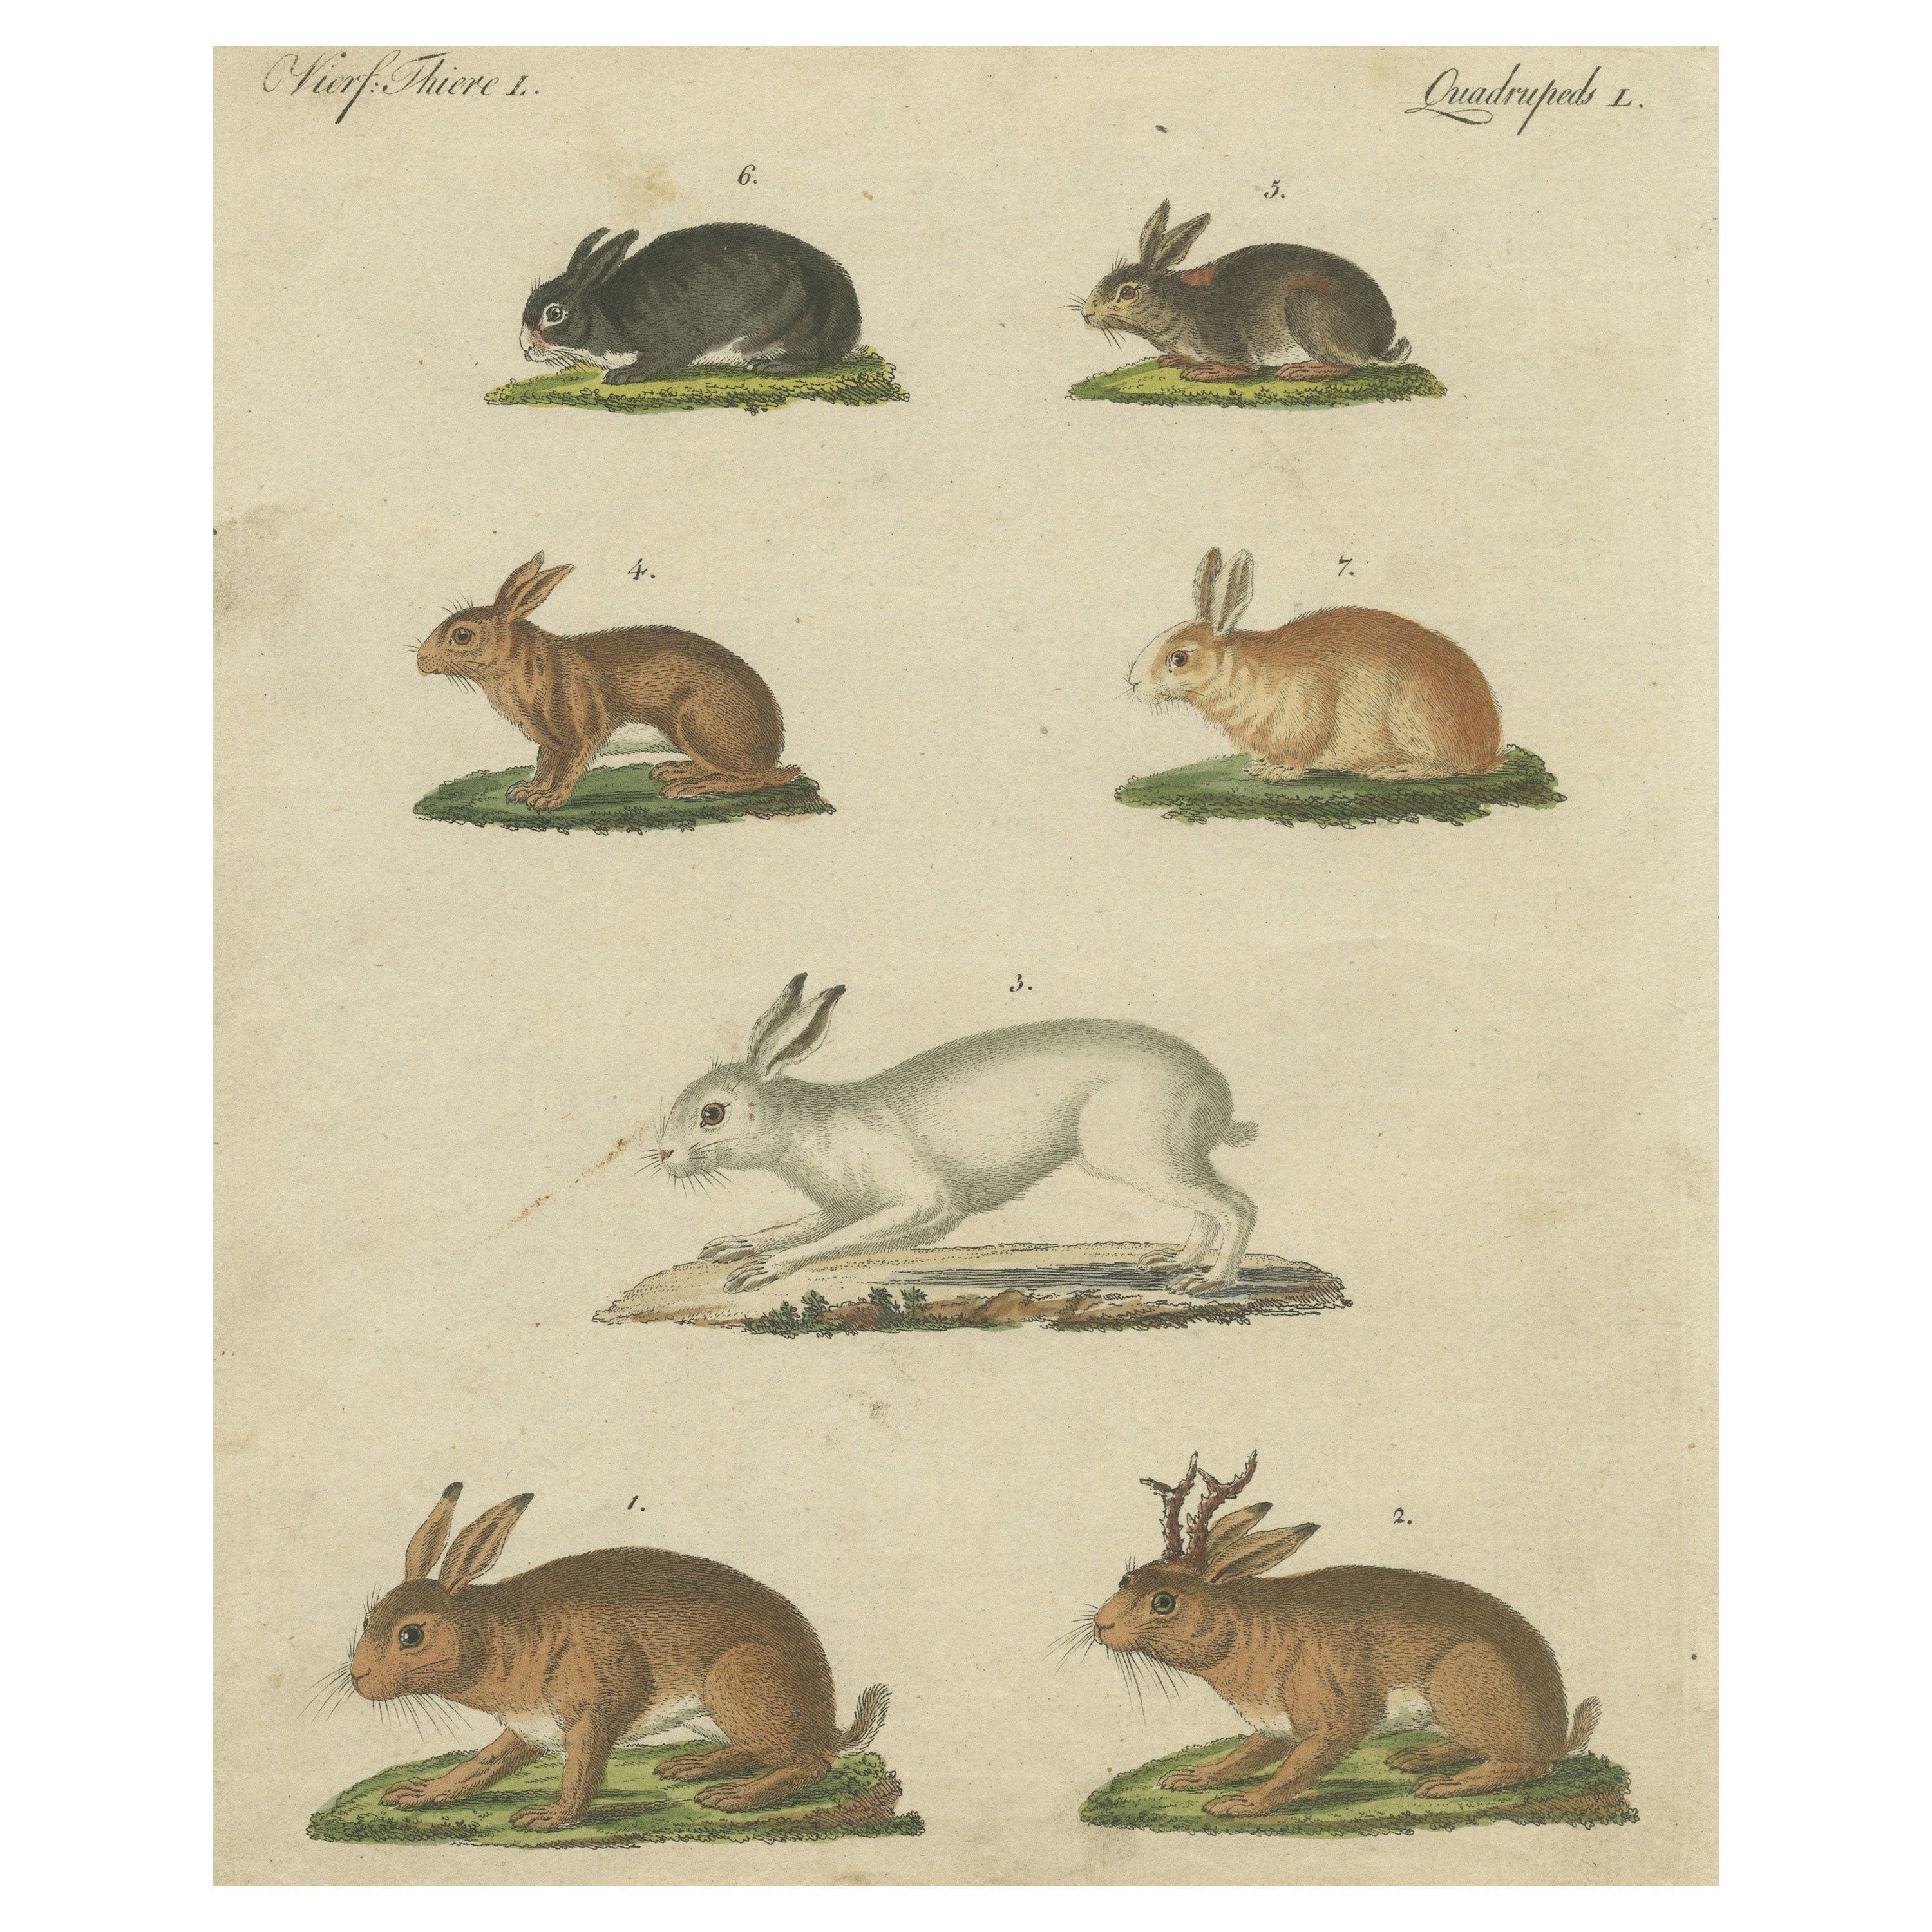 Original Antique Print of a Mountain Hare, Rabbit and Others For Sale